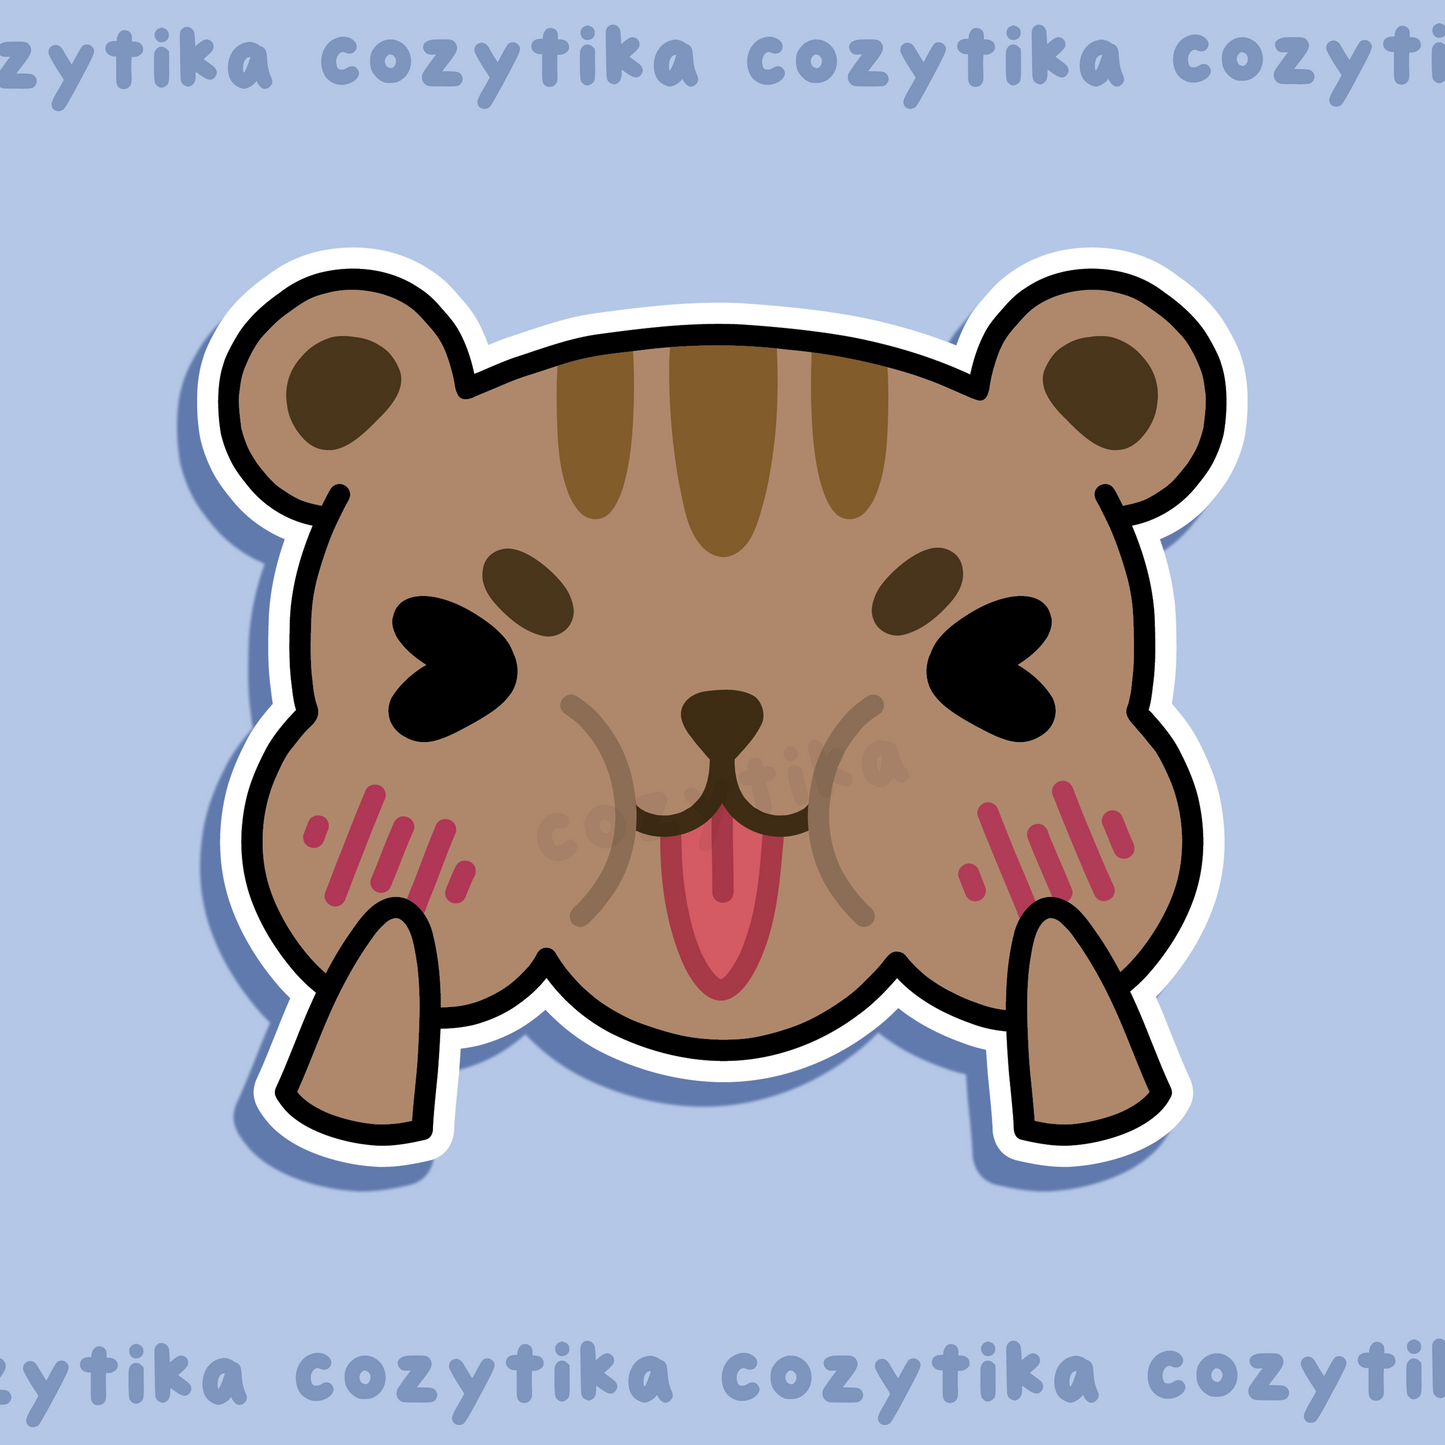 Bear named Tika sticking tongue out sticker graphic